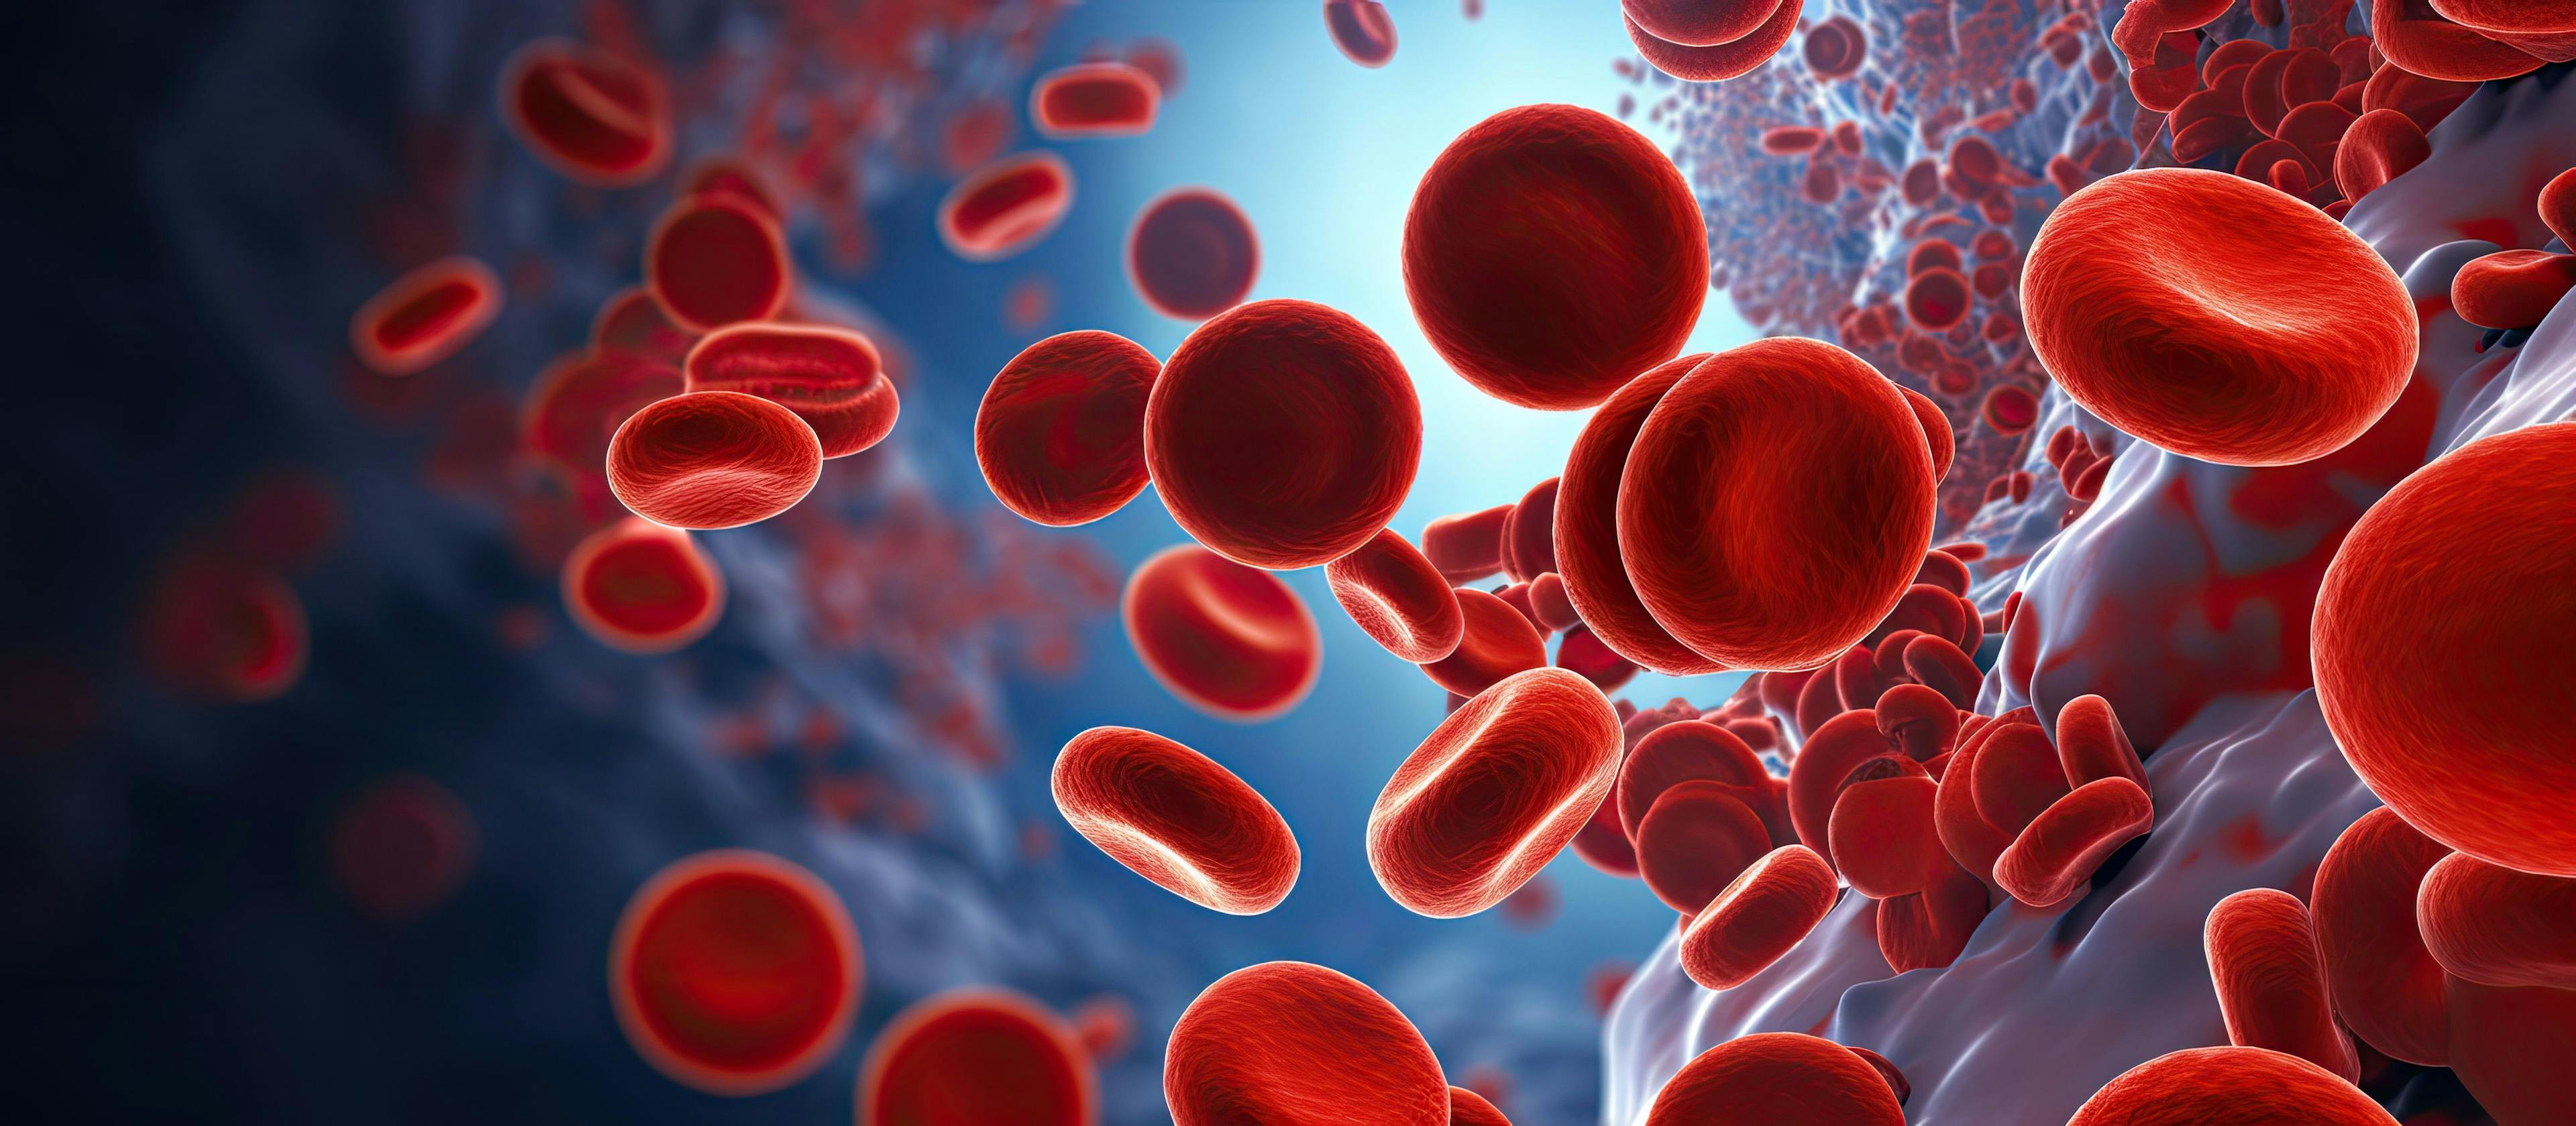 Microscopic images of red blood cells activated platelets and white blood cells: © AkuAku - stock.adobe.com